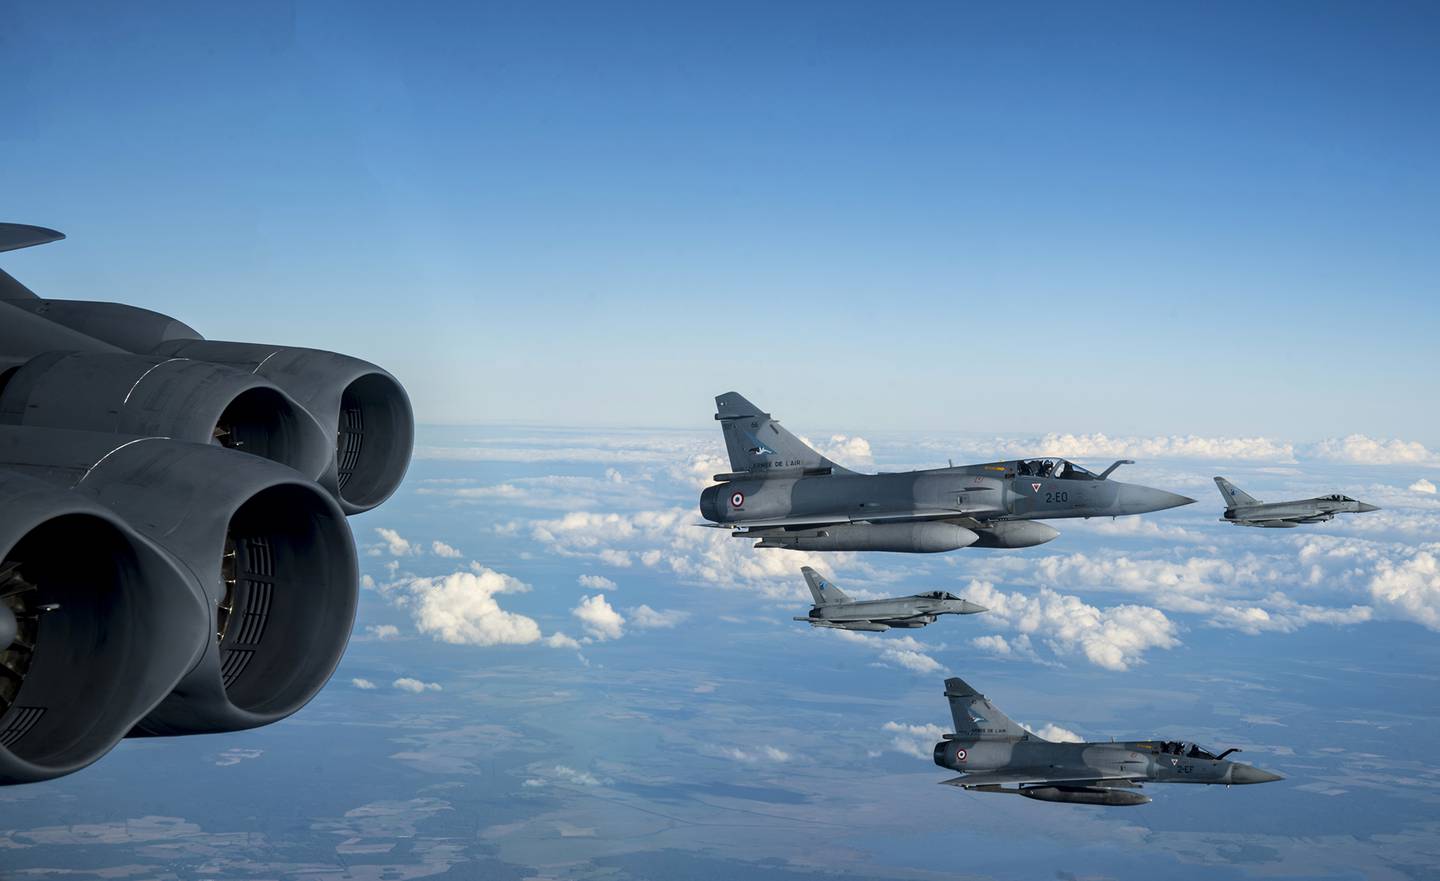 Two French Dassault Mirage and two Italian Typhoon fighter jets integrate with a U.S. B-52H Stratofortress in support of the Bomber Task Force Europe mission, Allied Sky, on Aug. 28, 2020.